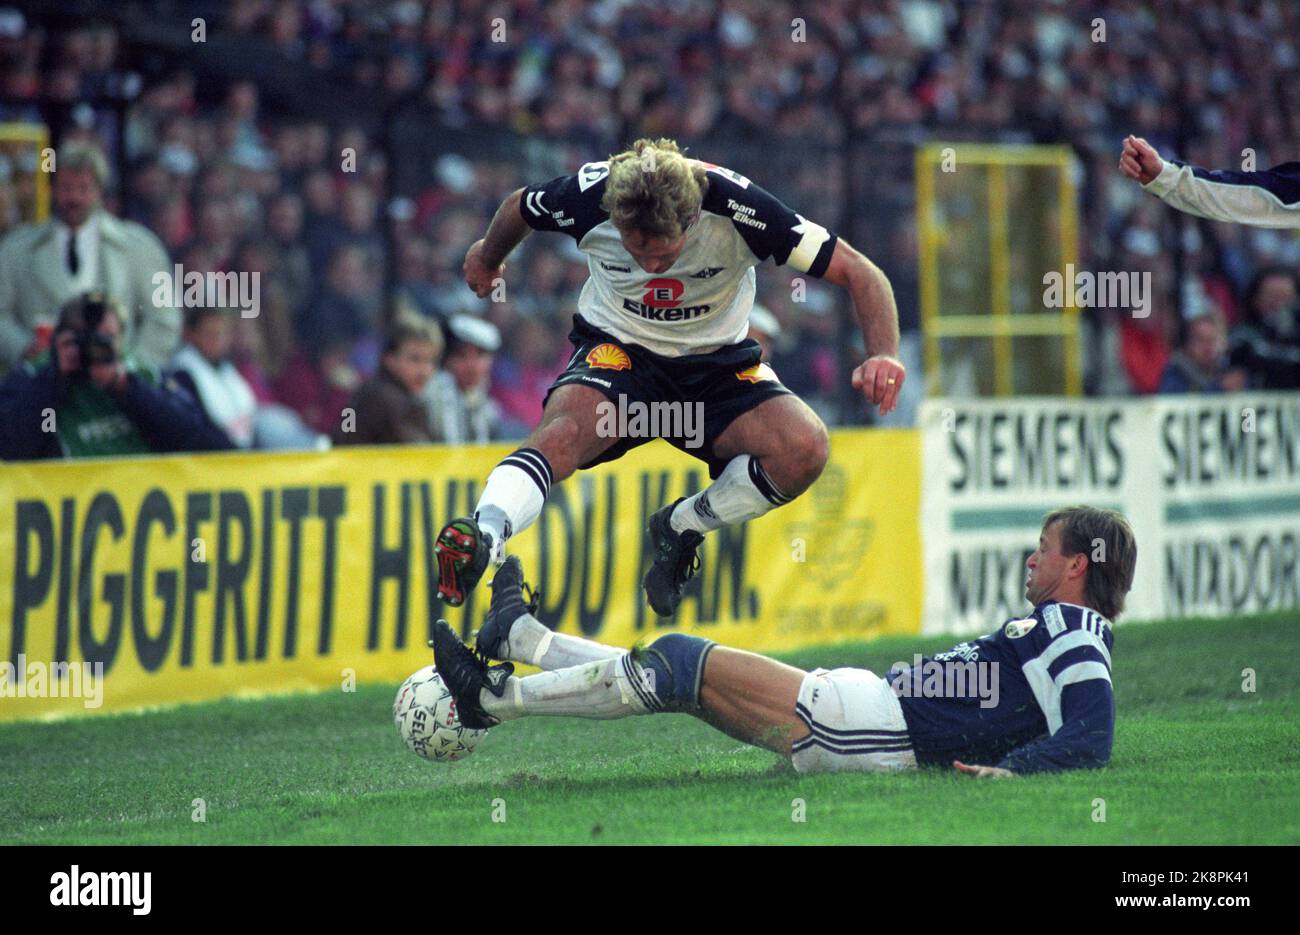 Oslo 19911020: Cup final 1991. Rosenborg (RBK) - Strømsgodset (SIF) (2-3). Ullevaal Stadium. Picture: Rosenborg's Gøran Sørloth in an airy hover over SIF player. Photo: Morten Holm Stock Photo